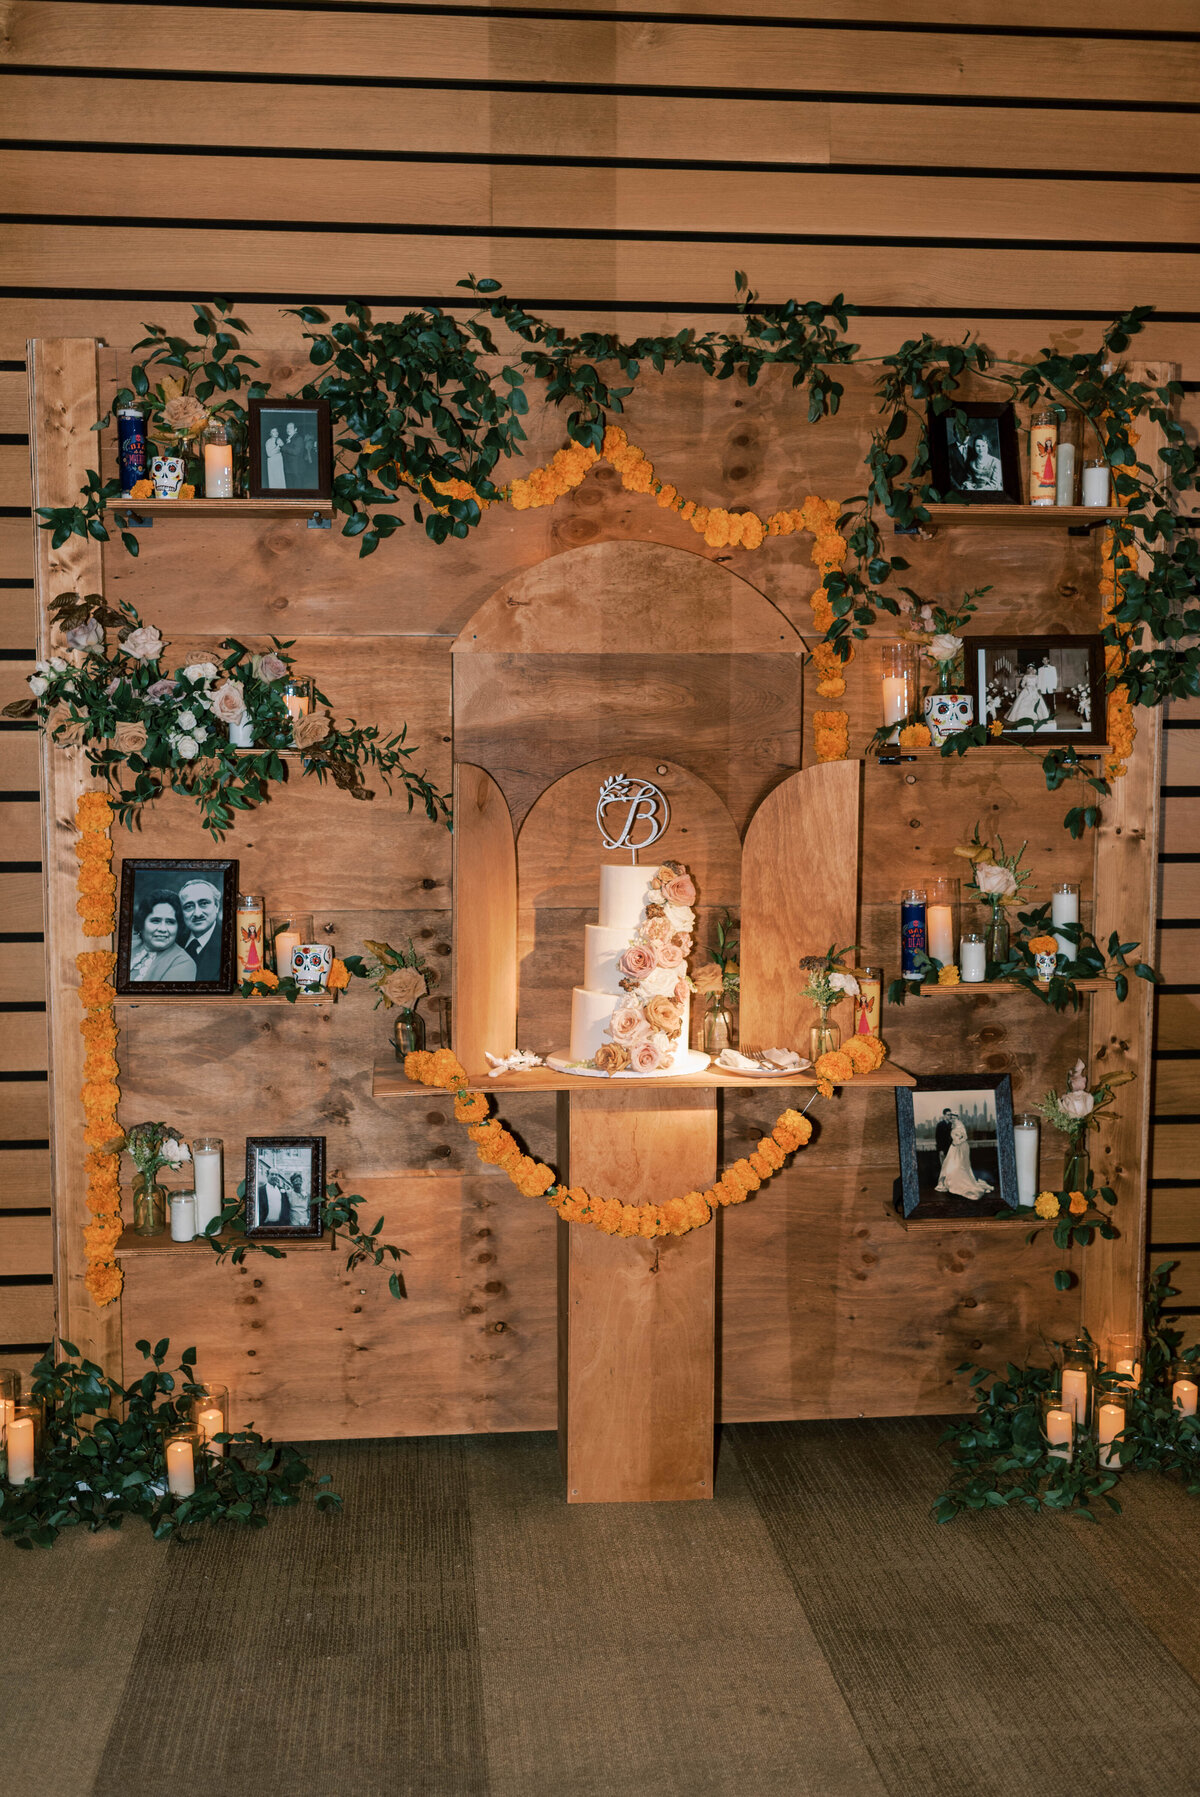 Wooden wedding reception backdrop lit with candles and decorated with greenery and framed photographs